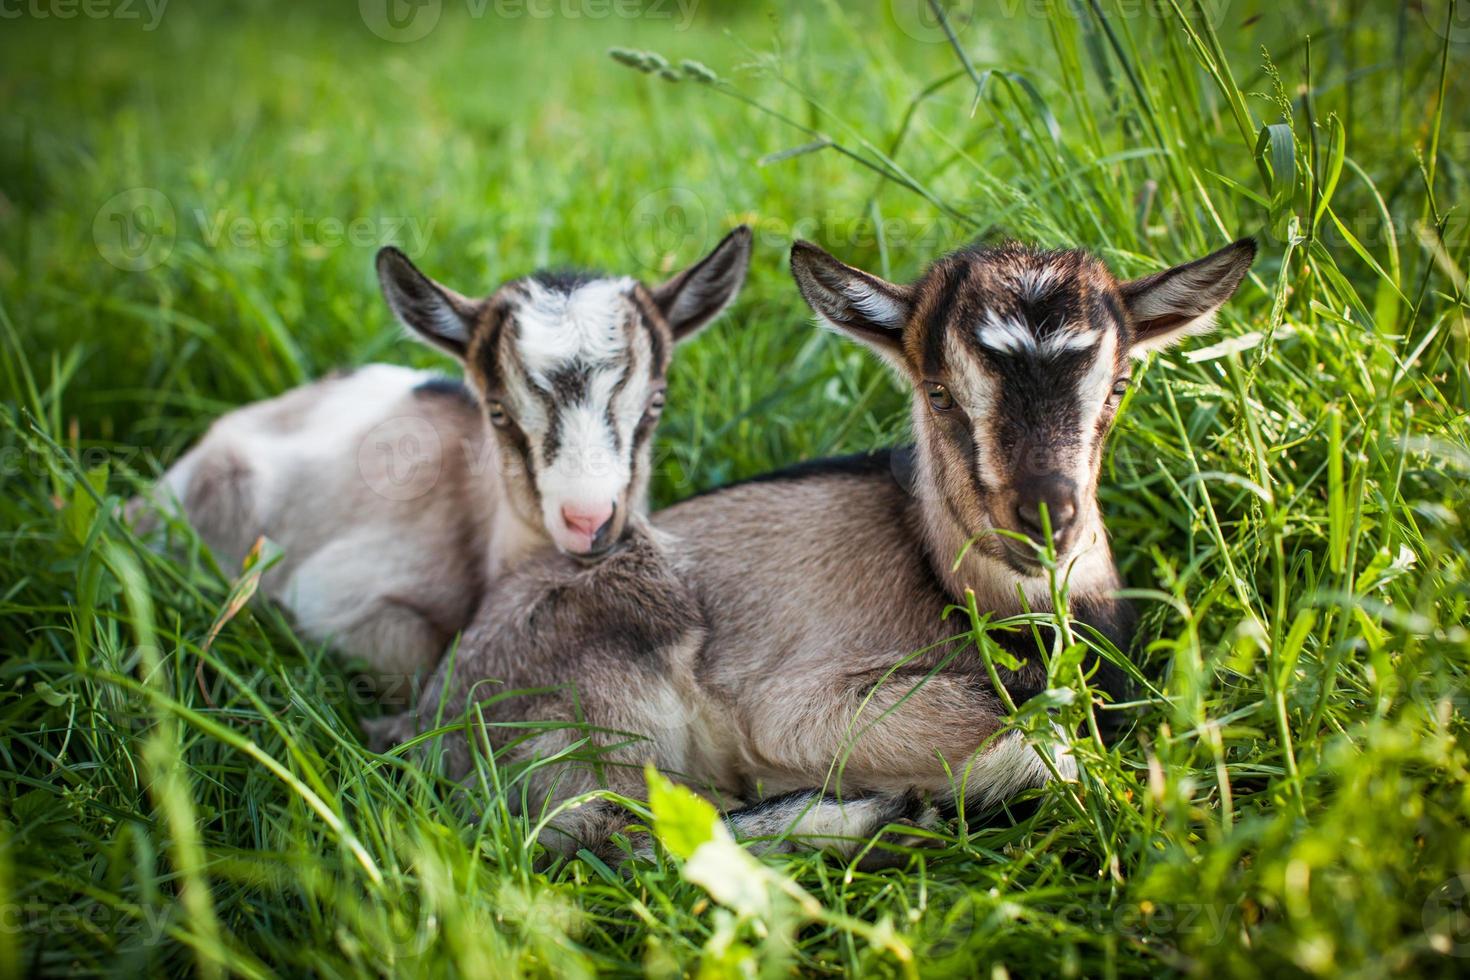 A beautiful photo of two little goats that lie together in grass